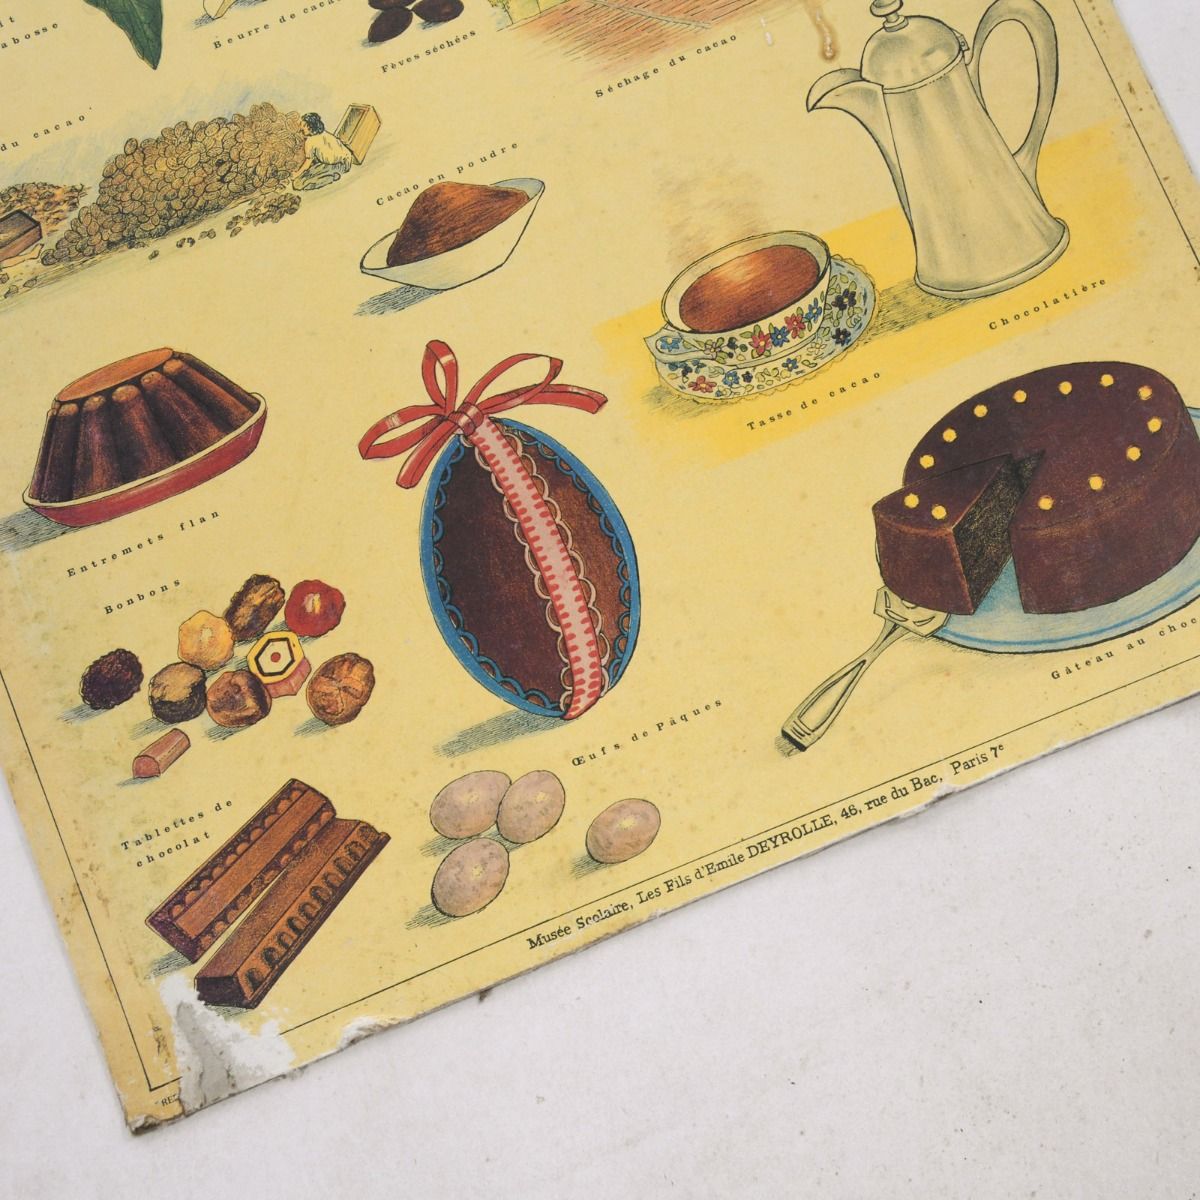 Vintage 1950s French School Poster 'Le Cacao' Musée scolaire